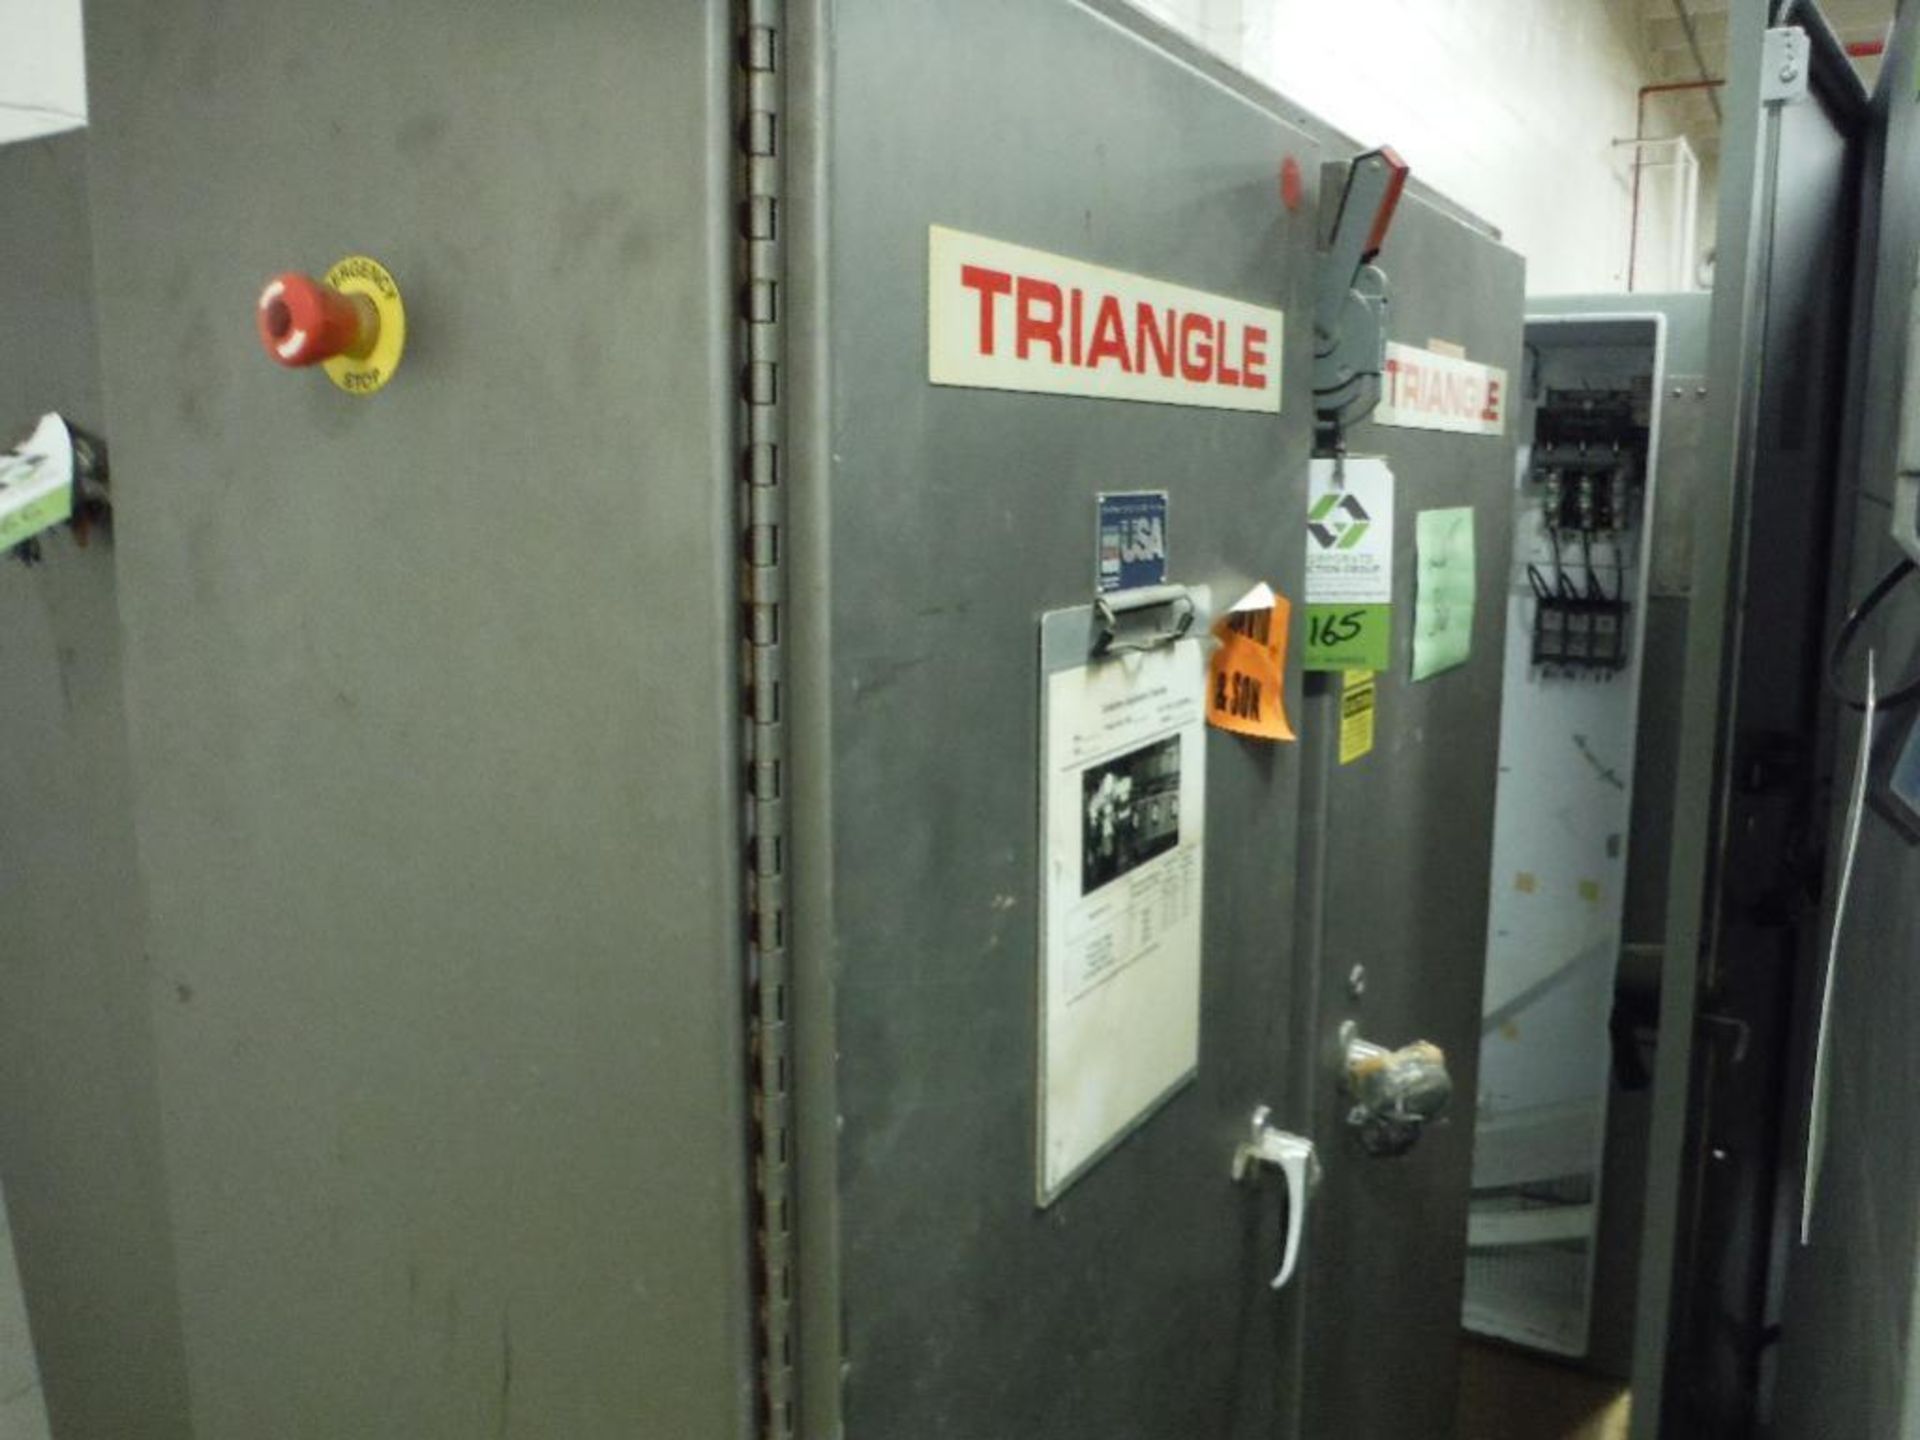 Mild steel control panel, 54 in. x 16 in. x 60 in. tall, misc. electric parts, labeled for Triangle